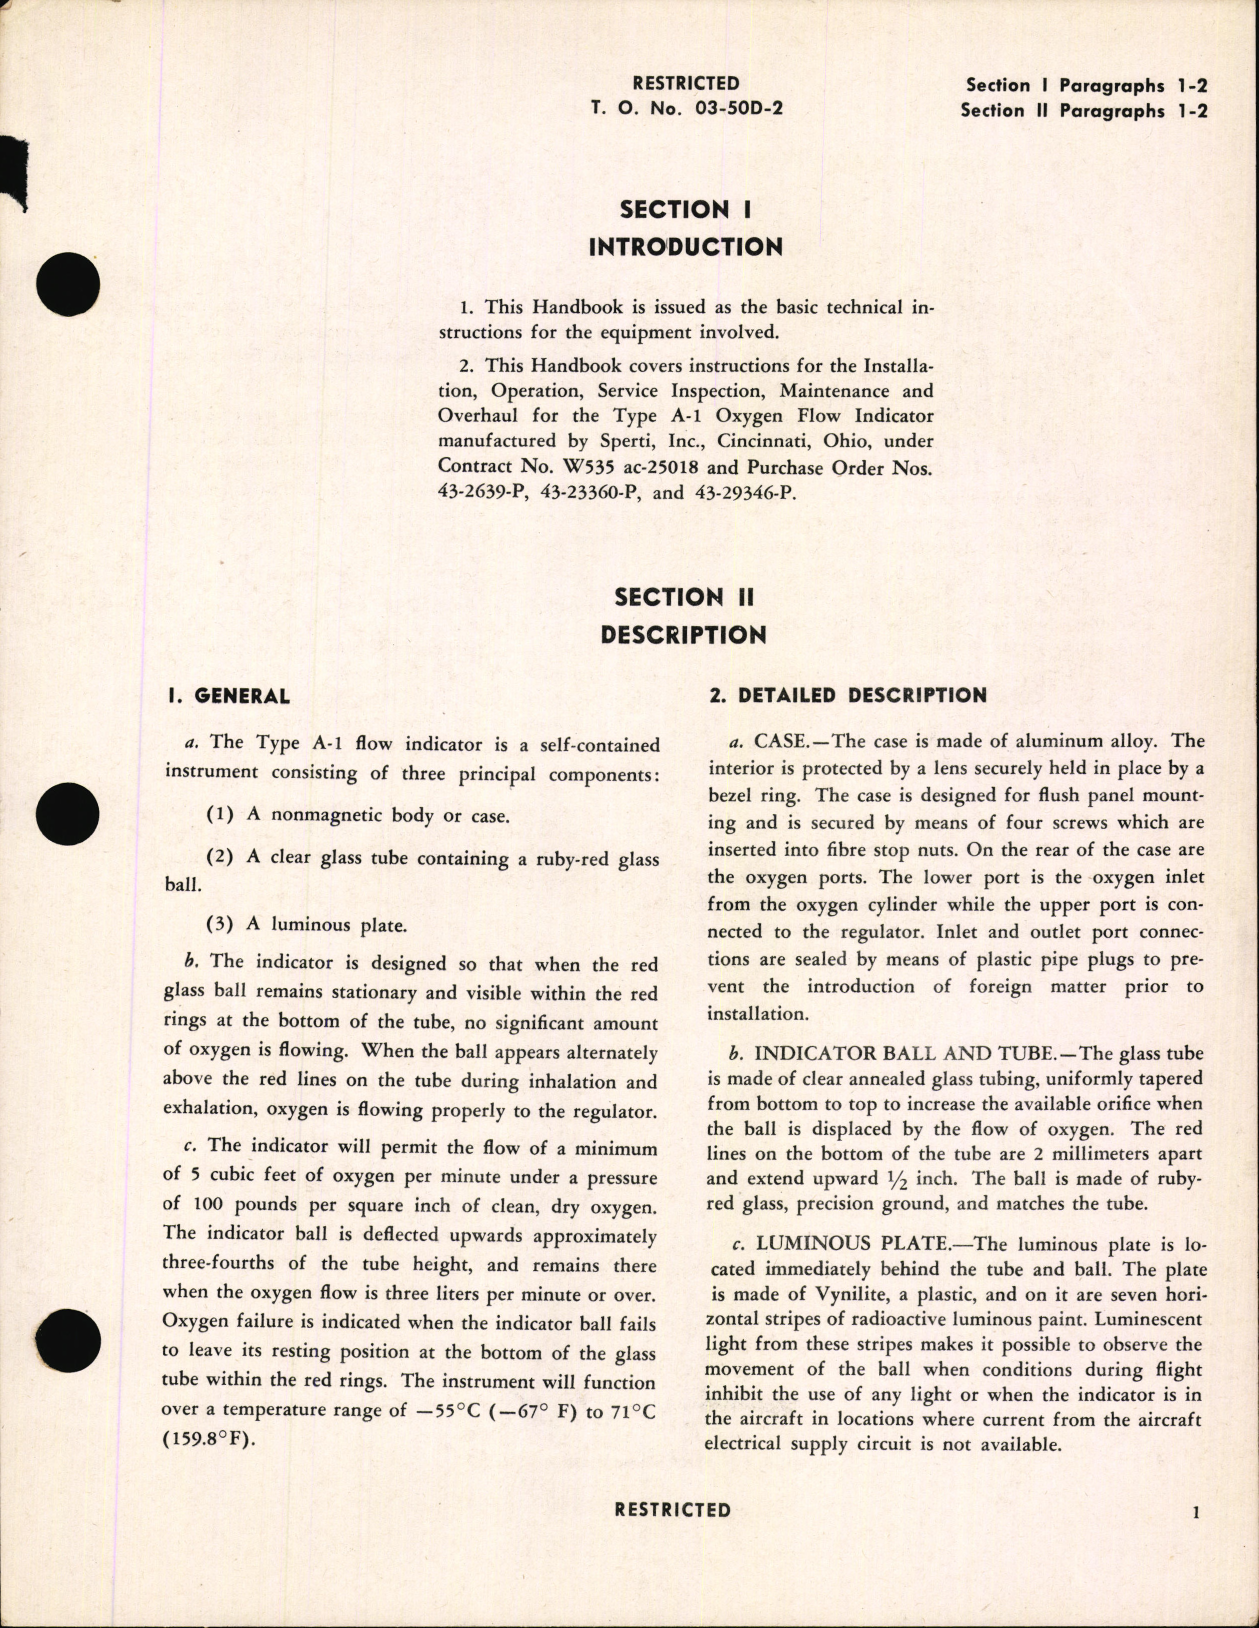 Sample page 5 from AirCorps Library document: Handbook of Instructions with Parts Catalog for Type A-1 Oxygen Flow Indicator